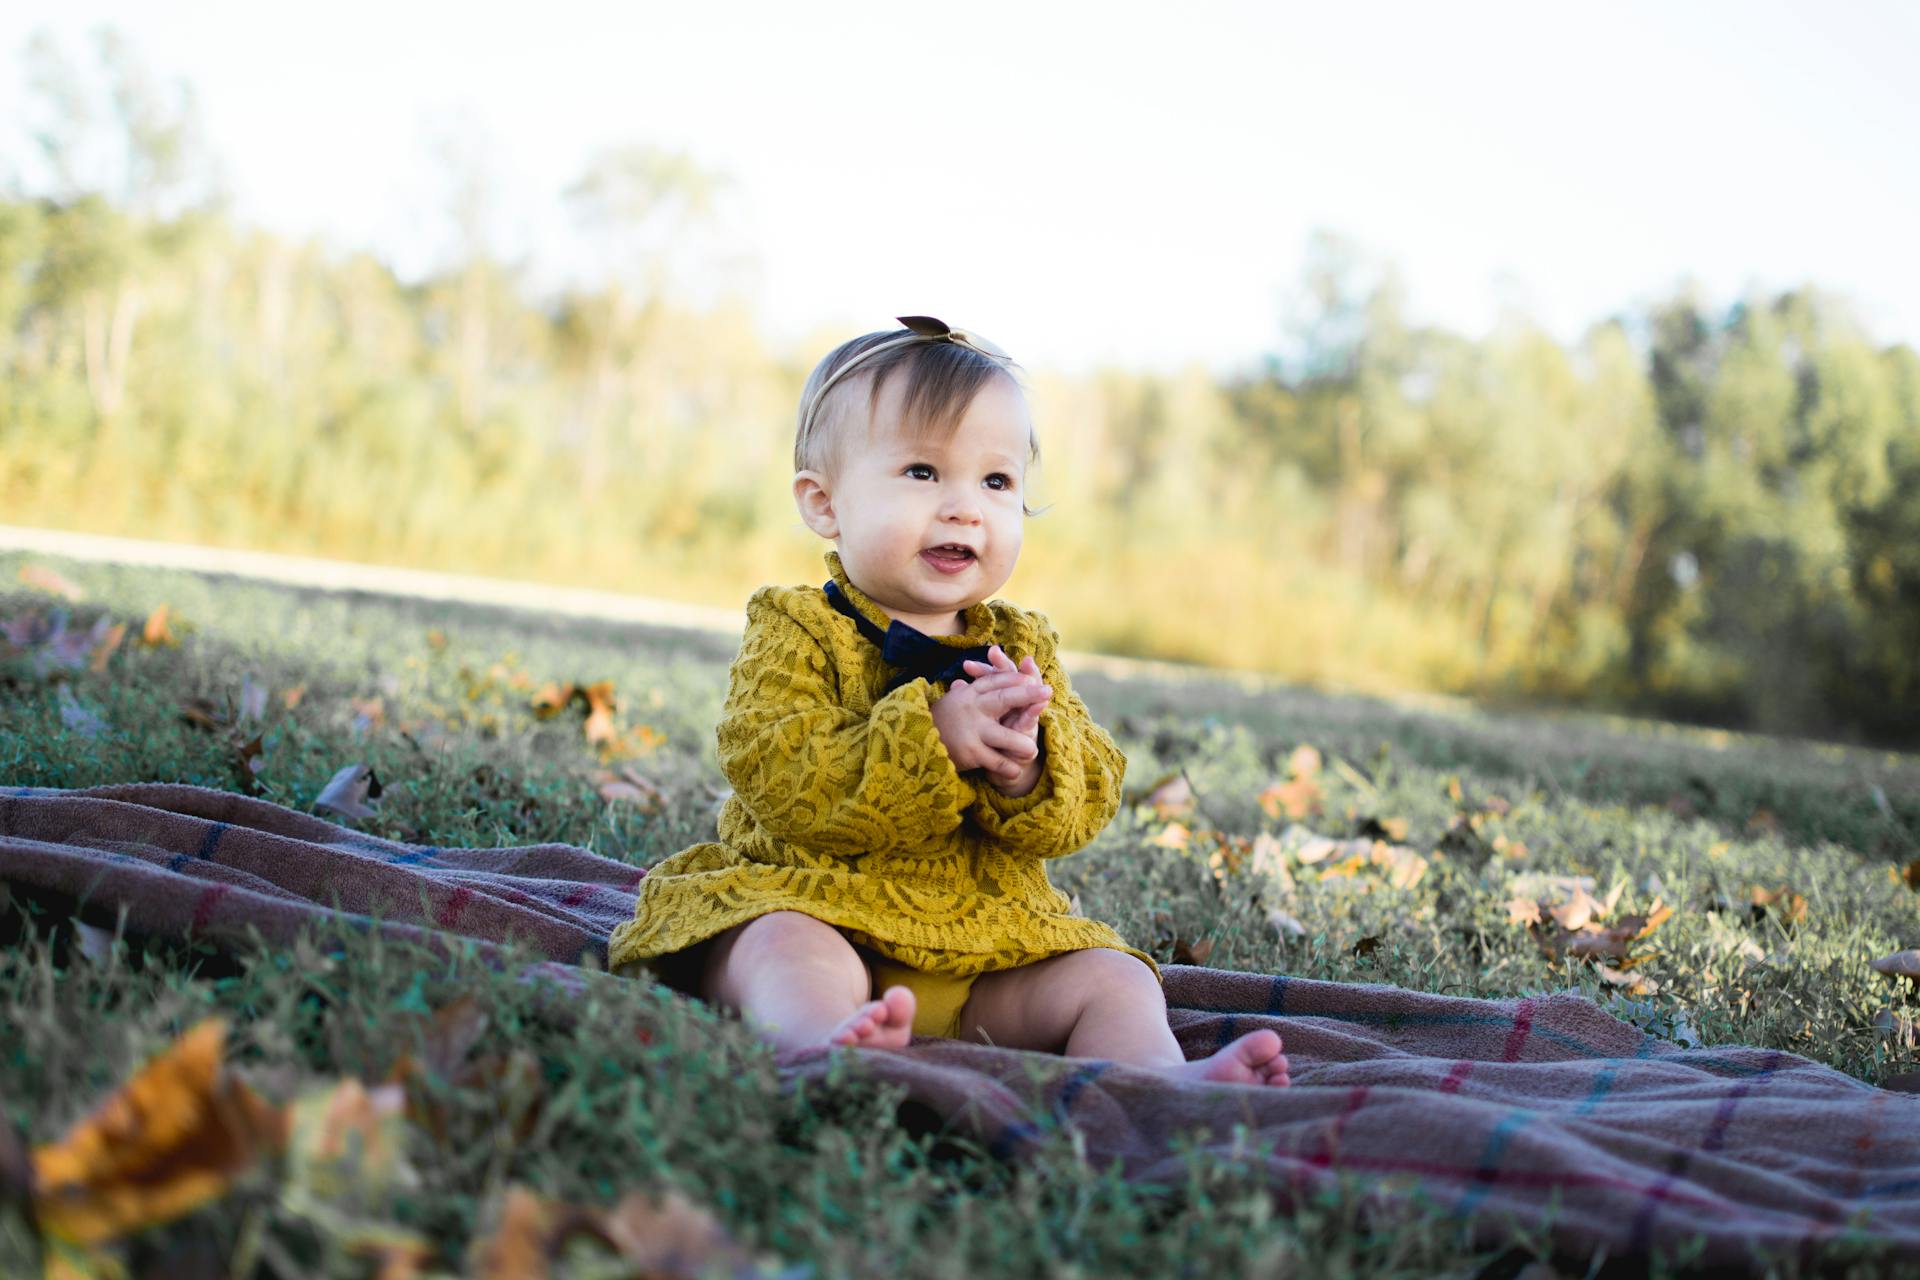 A baby girl sitting on a blanket outside | Source: Pexels